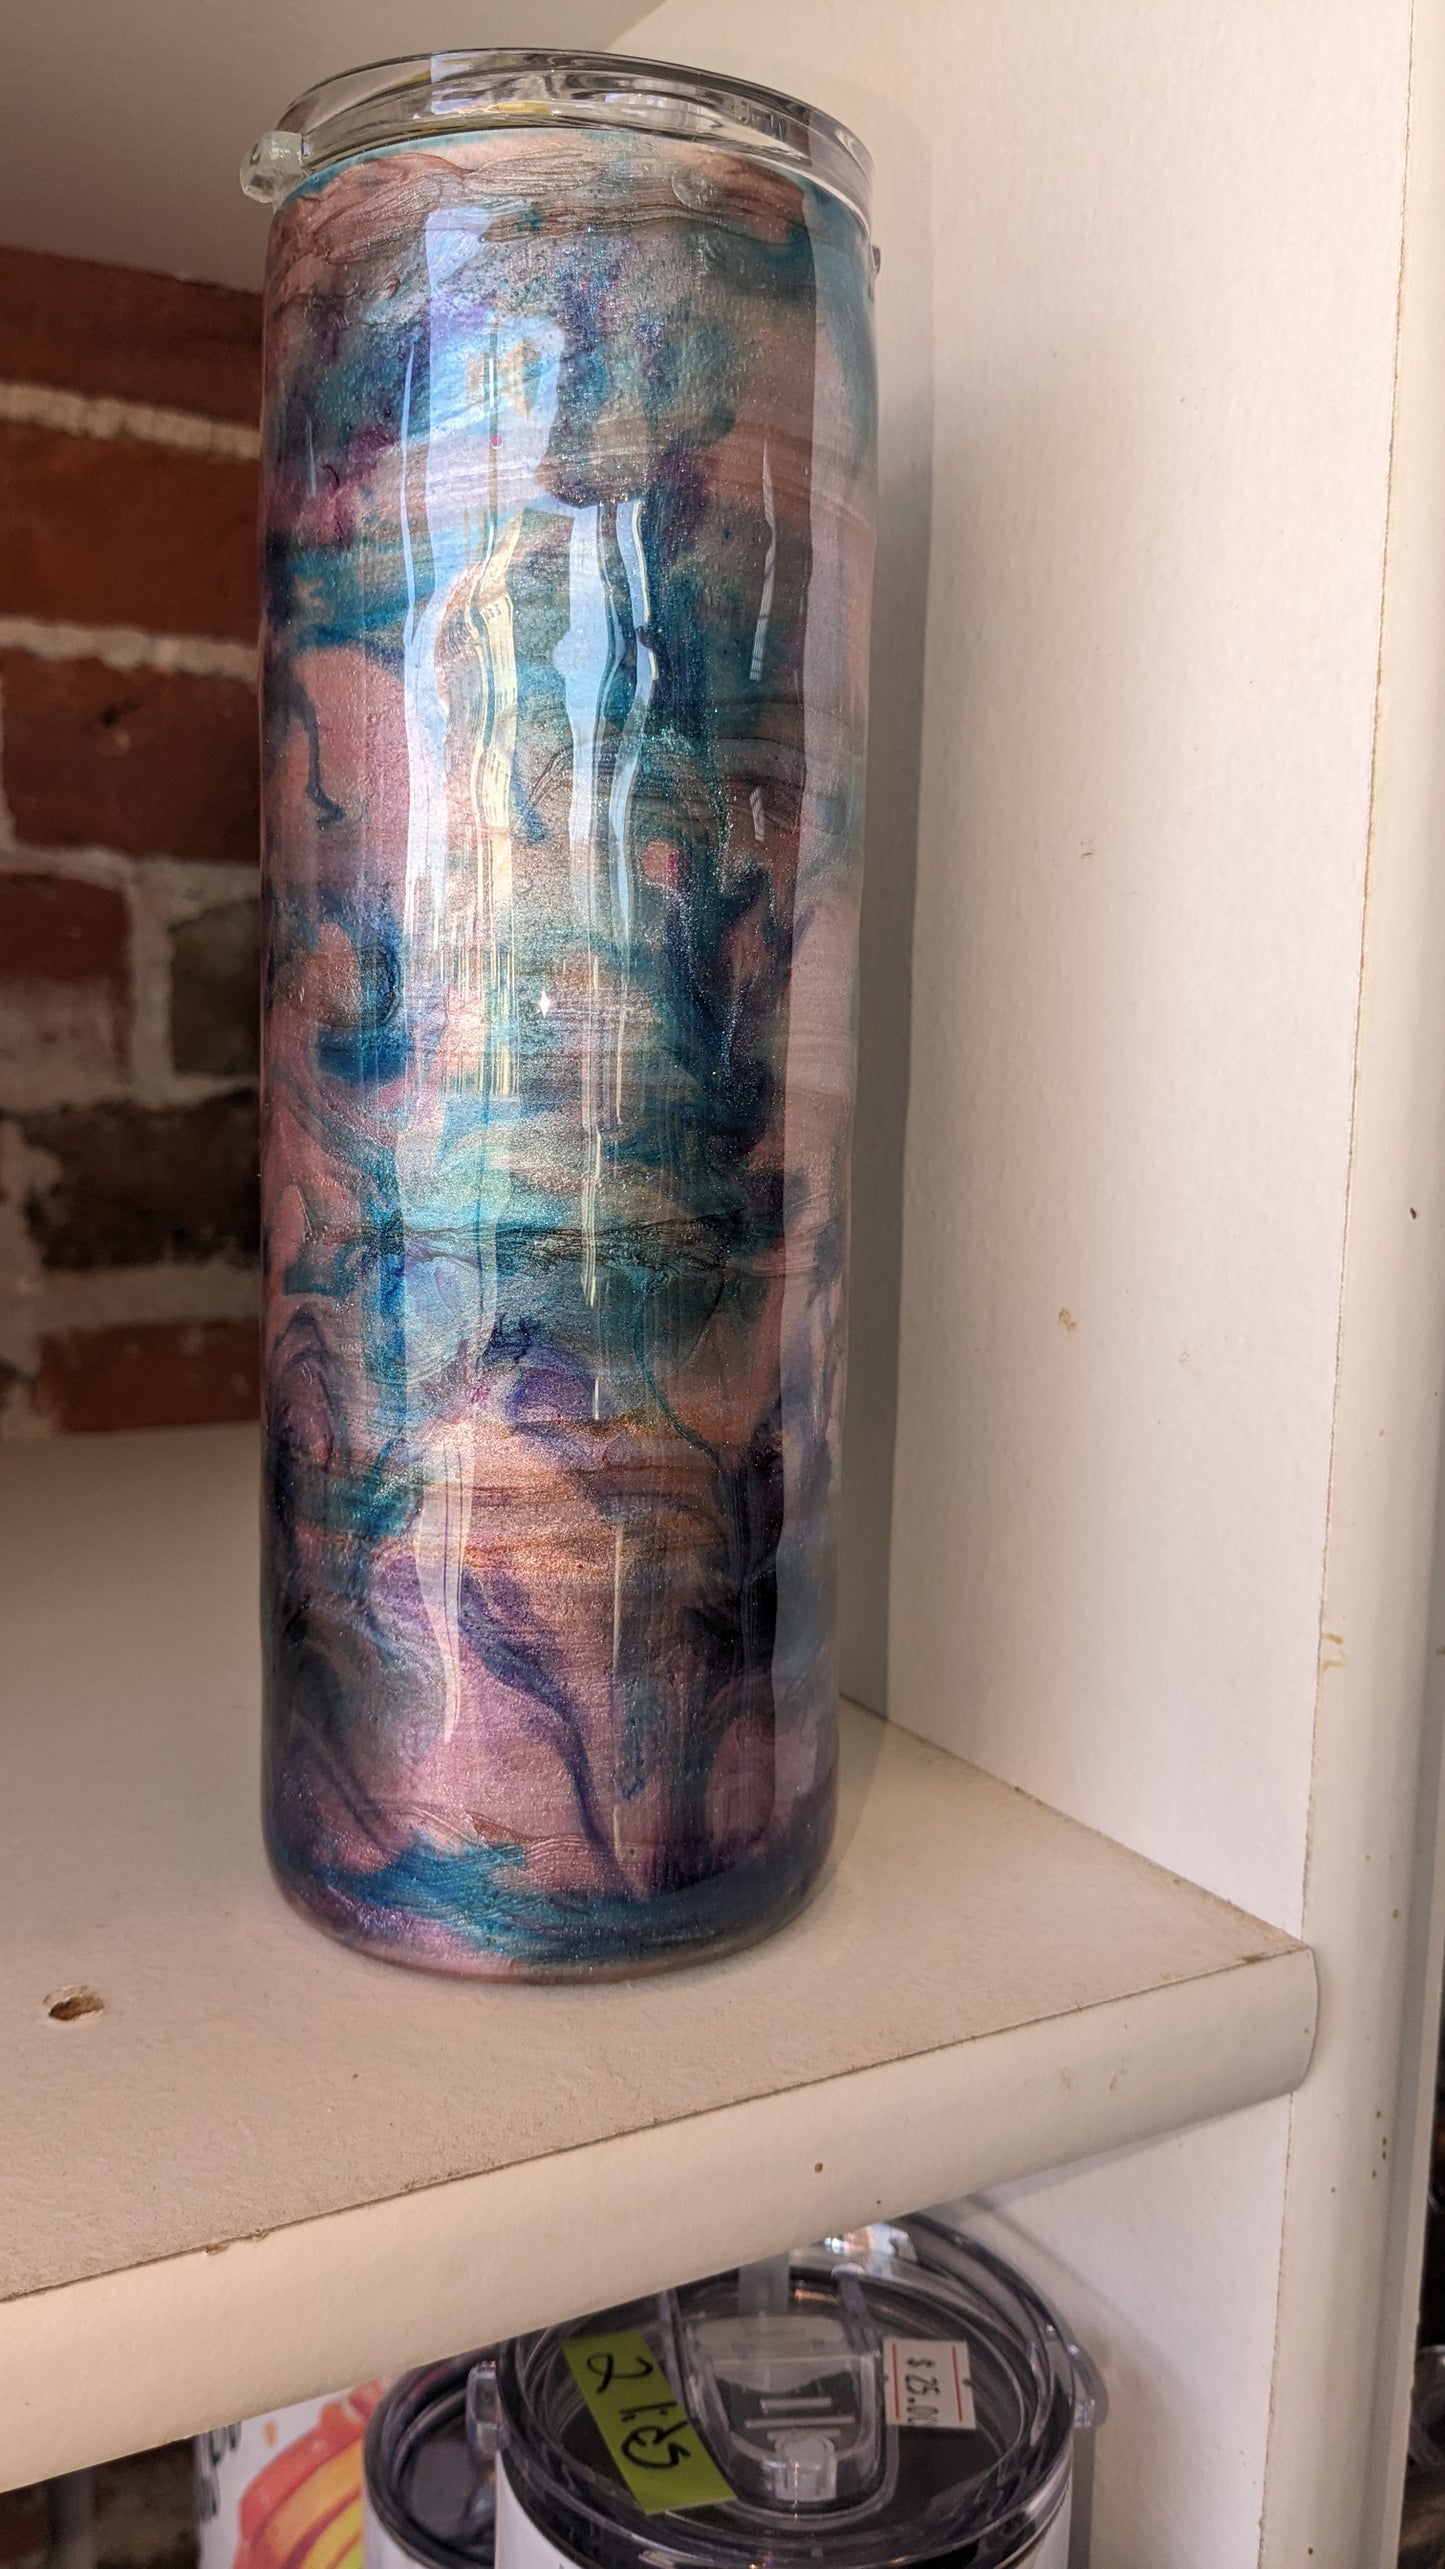 20 ounce stainless steel, Insulated, alcohol ink, Tumbler pink, aqua, peach